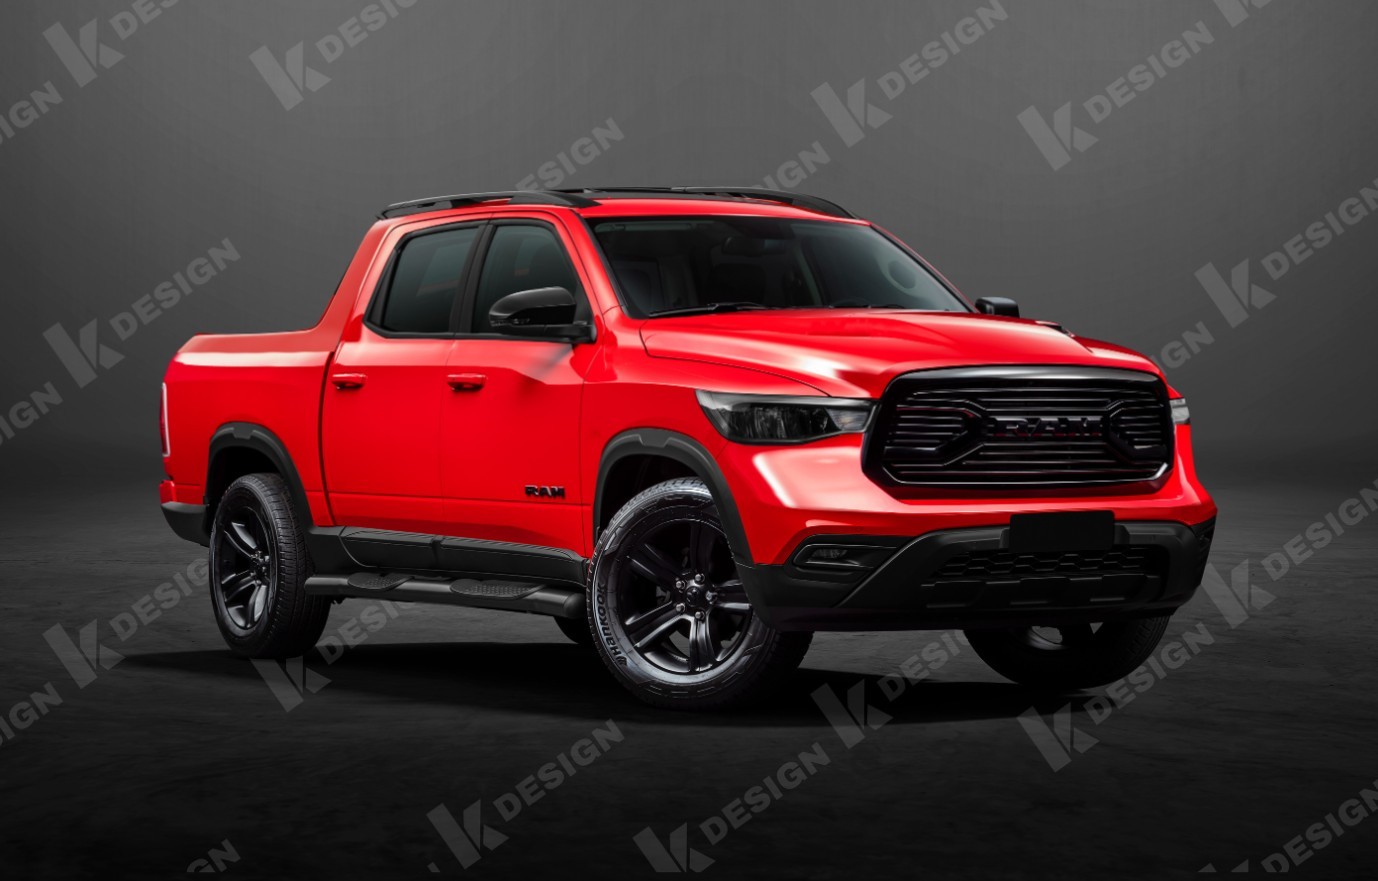 Virtual Ram 1200 MidSize Pickup Truck Seems Apt for and